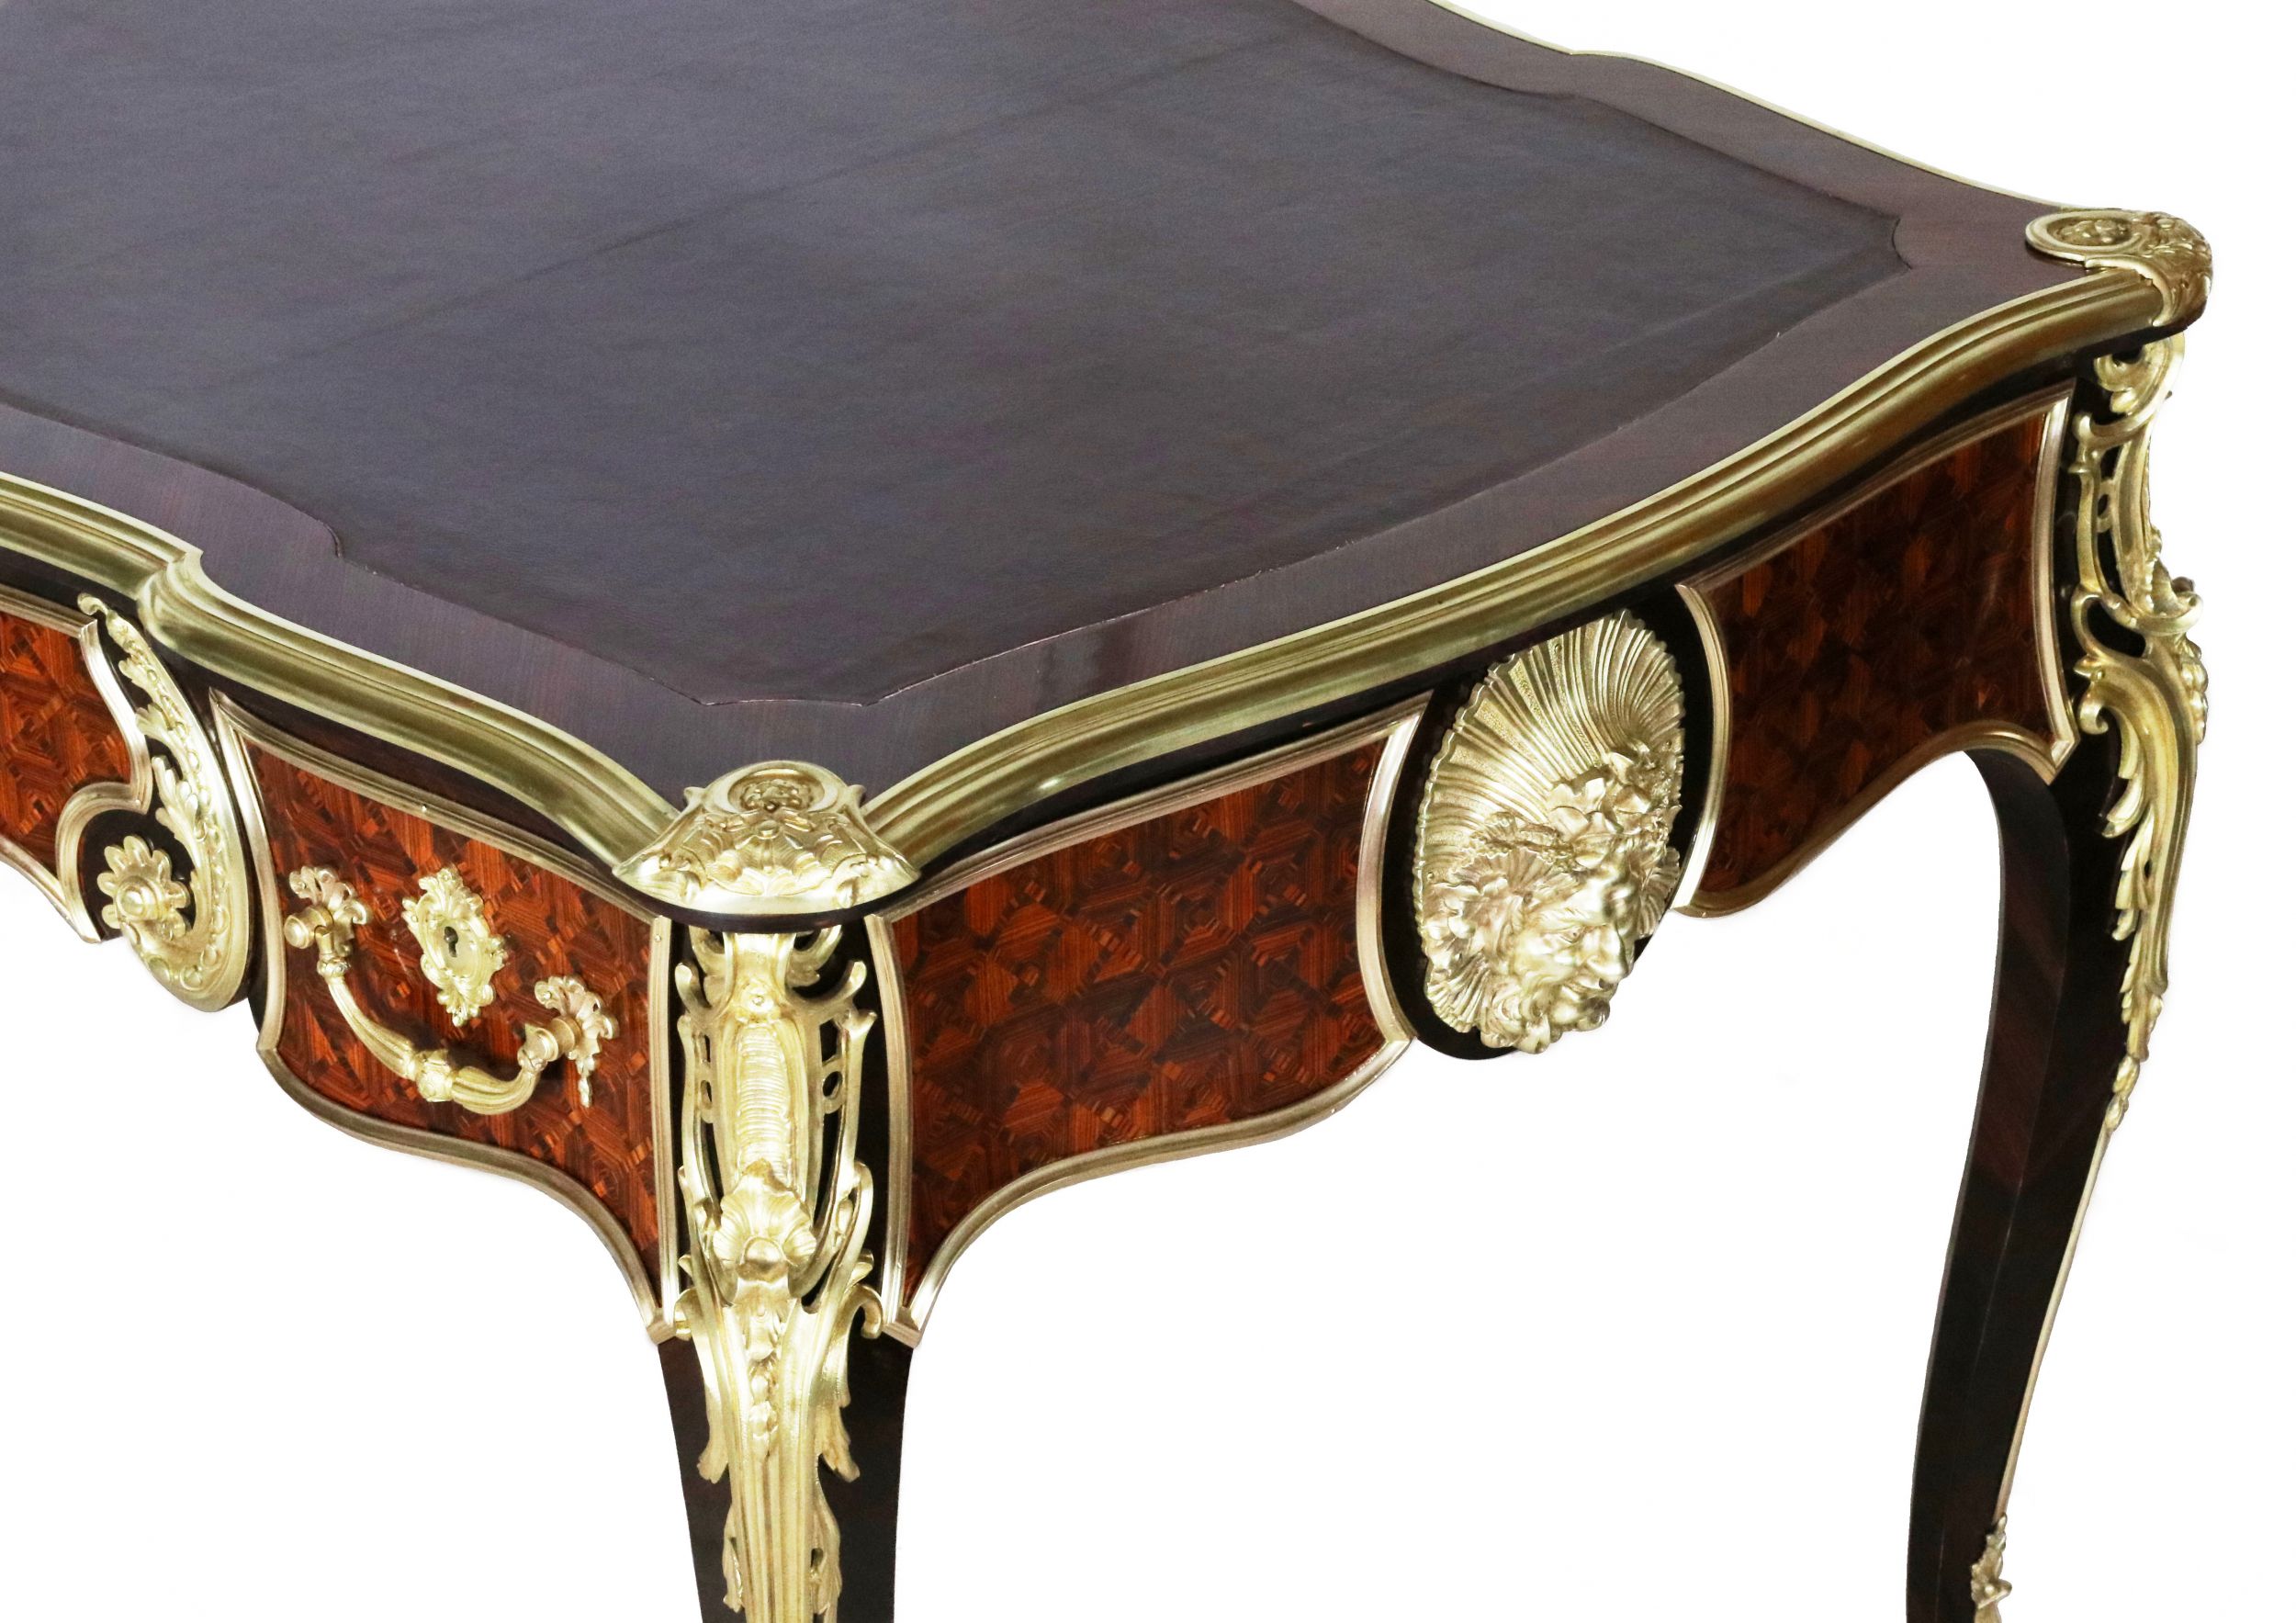 Magnificent writing desk in wood and gilded bronze, Louis XV style. - Image 8 of 8